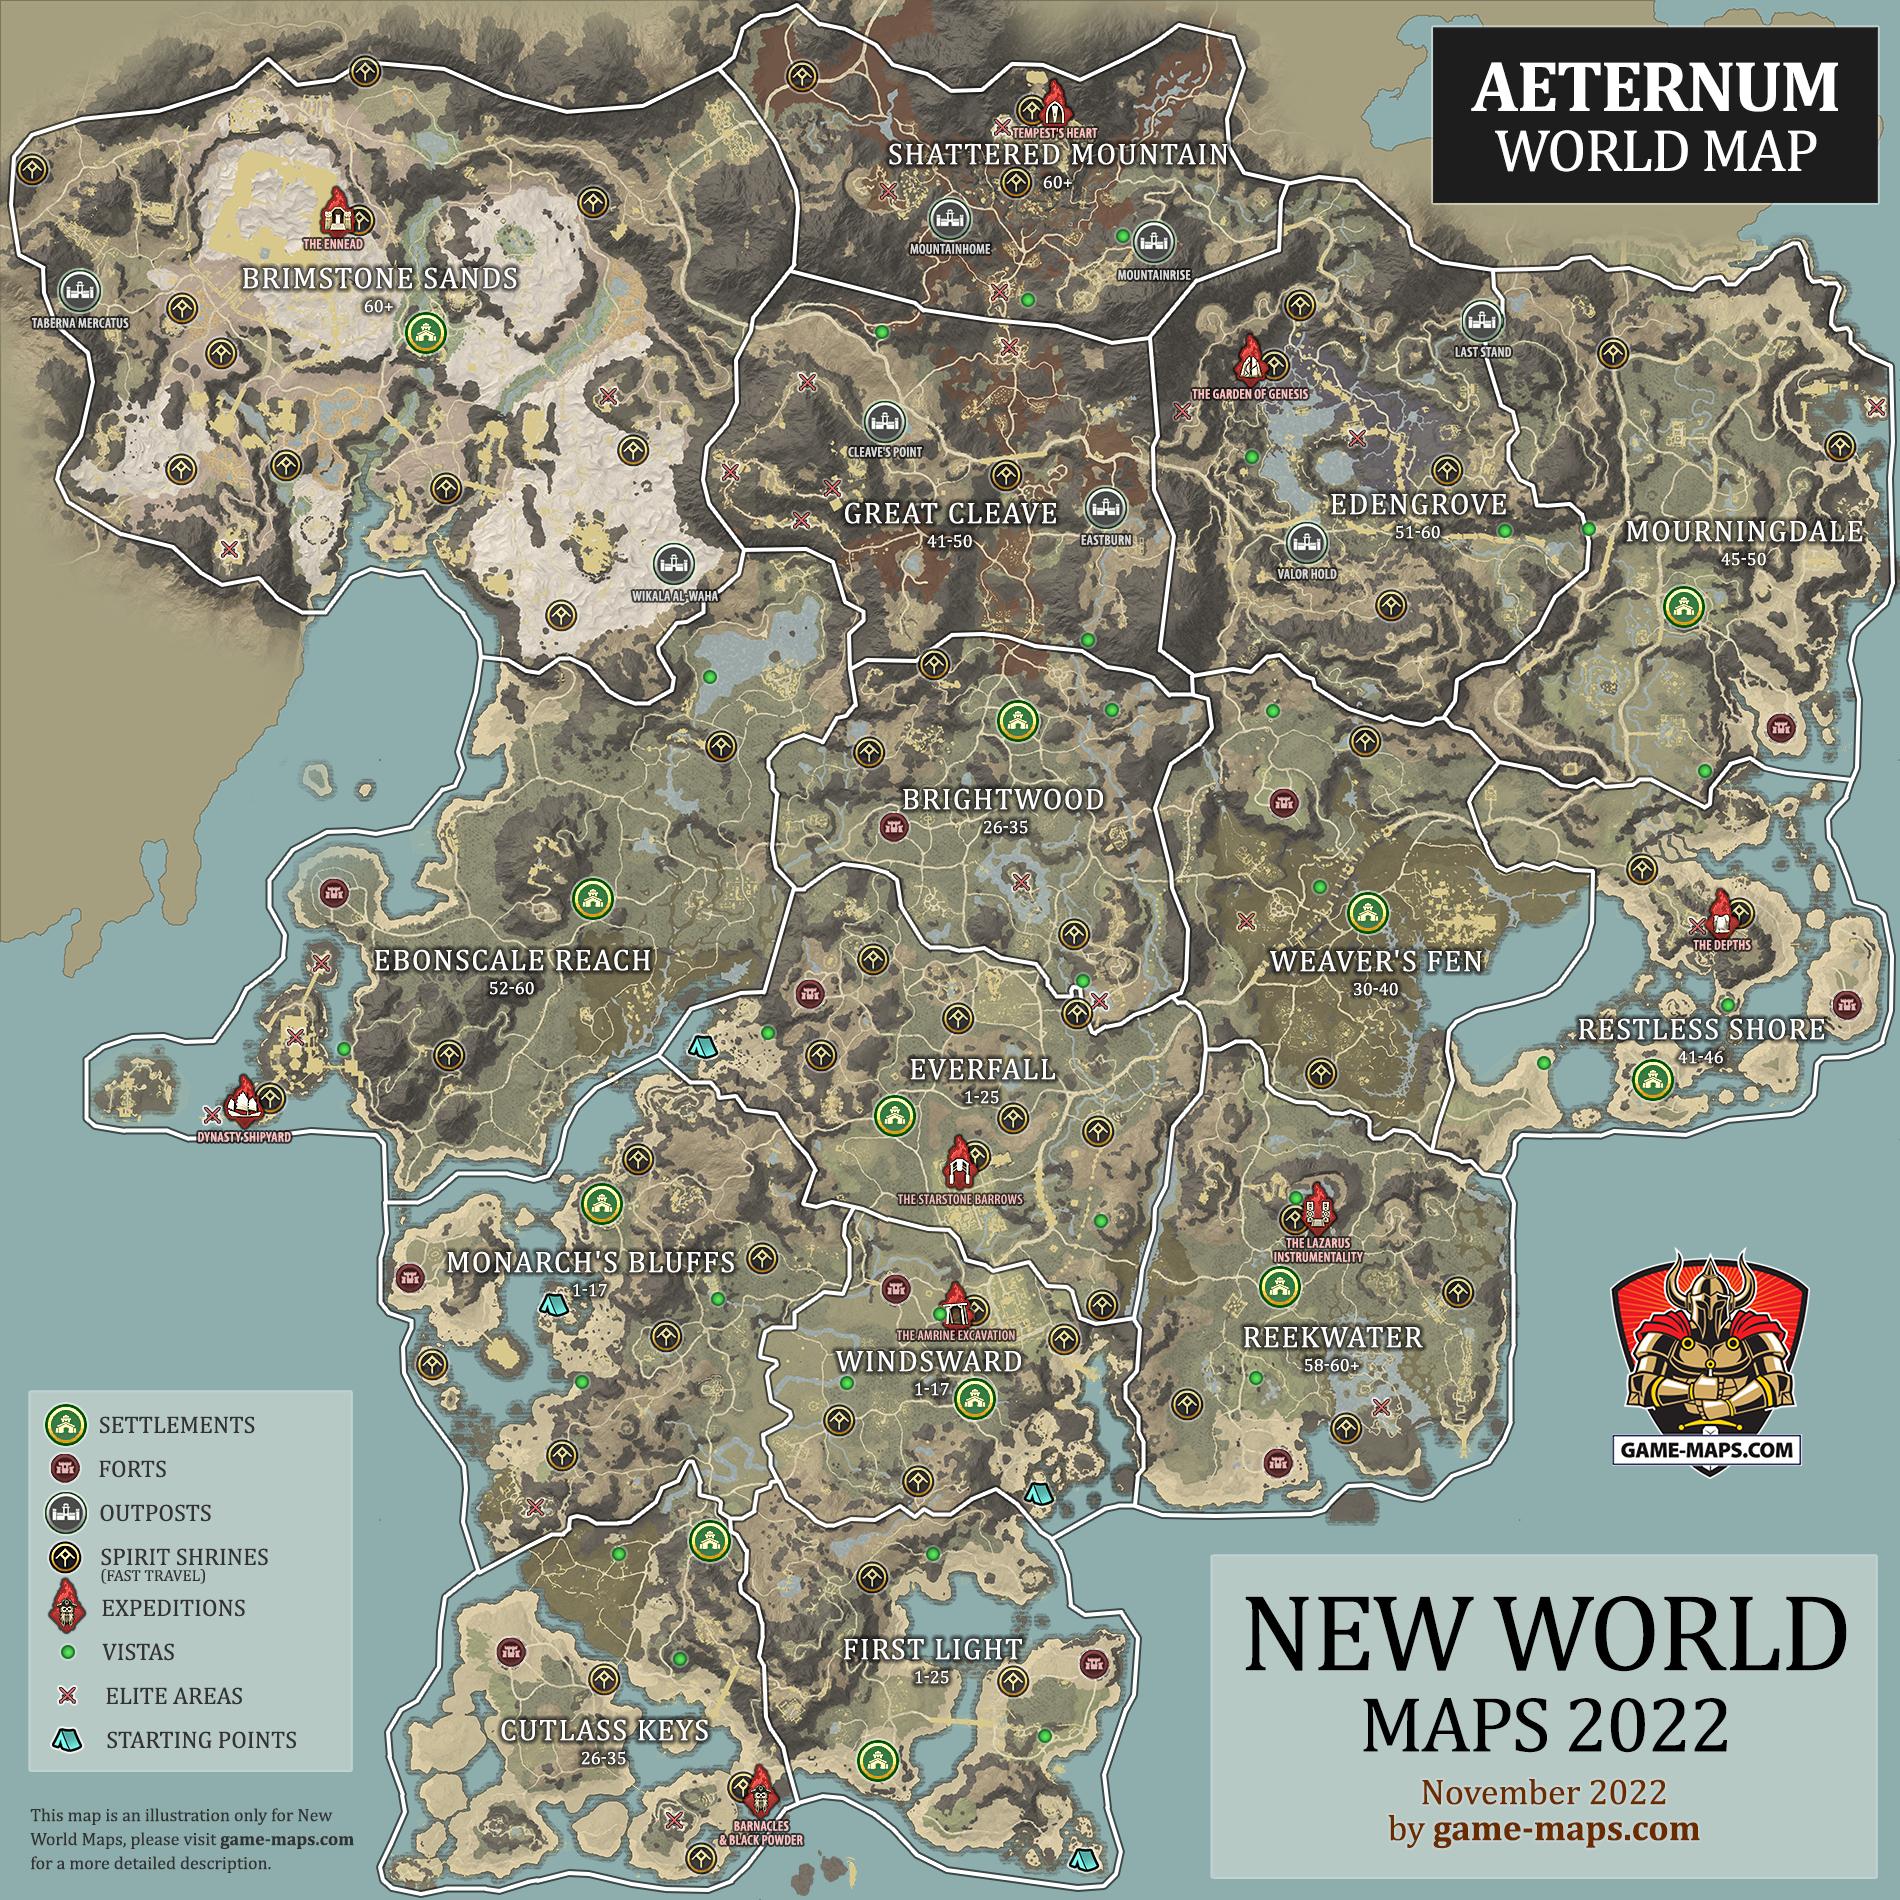 World Map for New World MMO 2022 - Aeternum